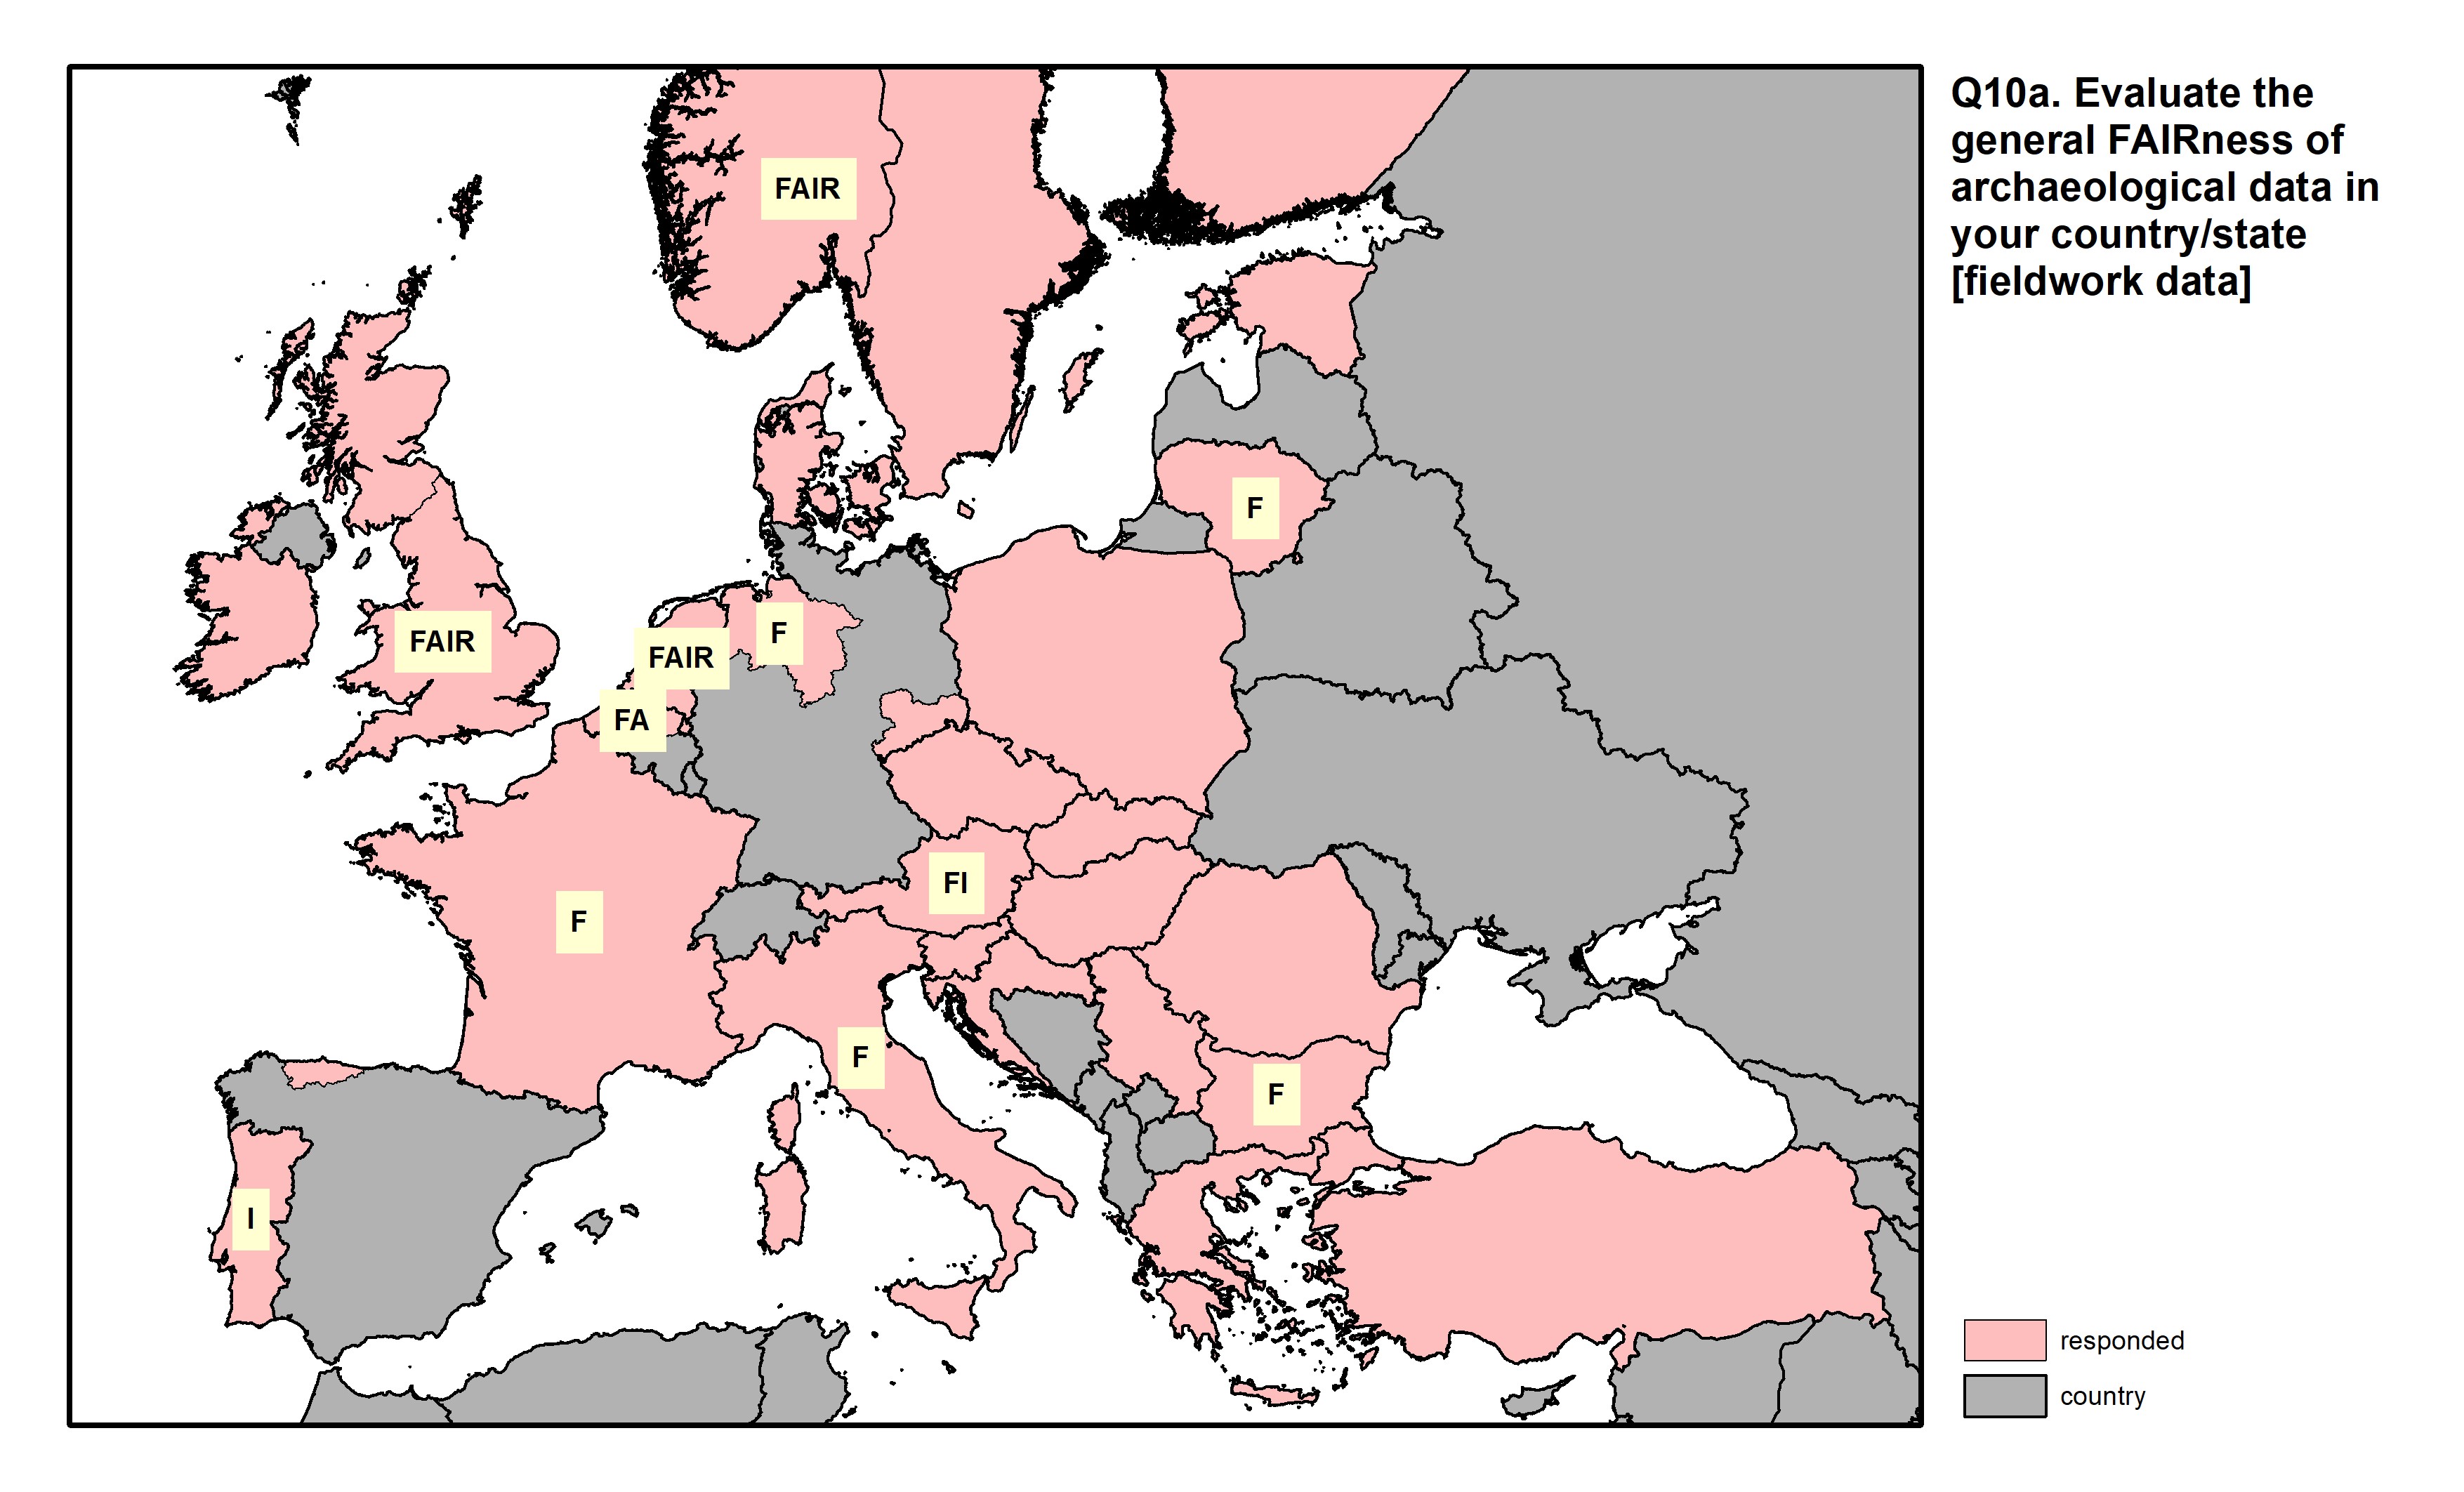 Figure 34: a map of Europe showing countries and regions in colour based on response rates to the survey question.